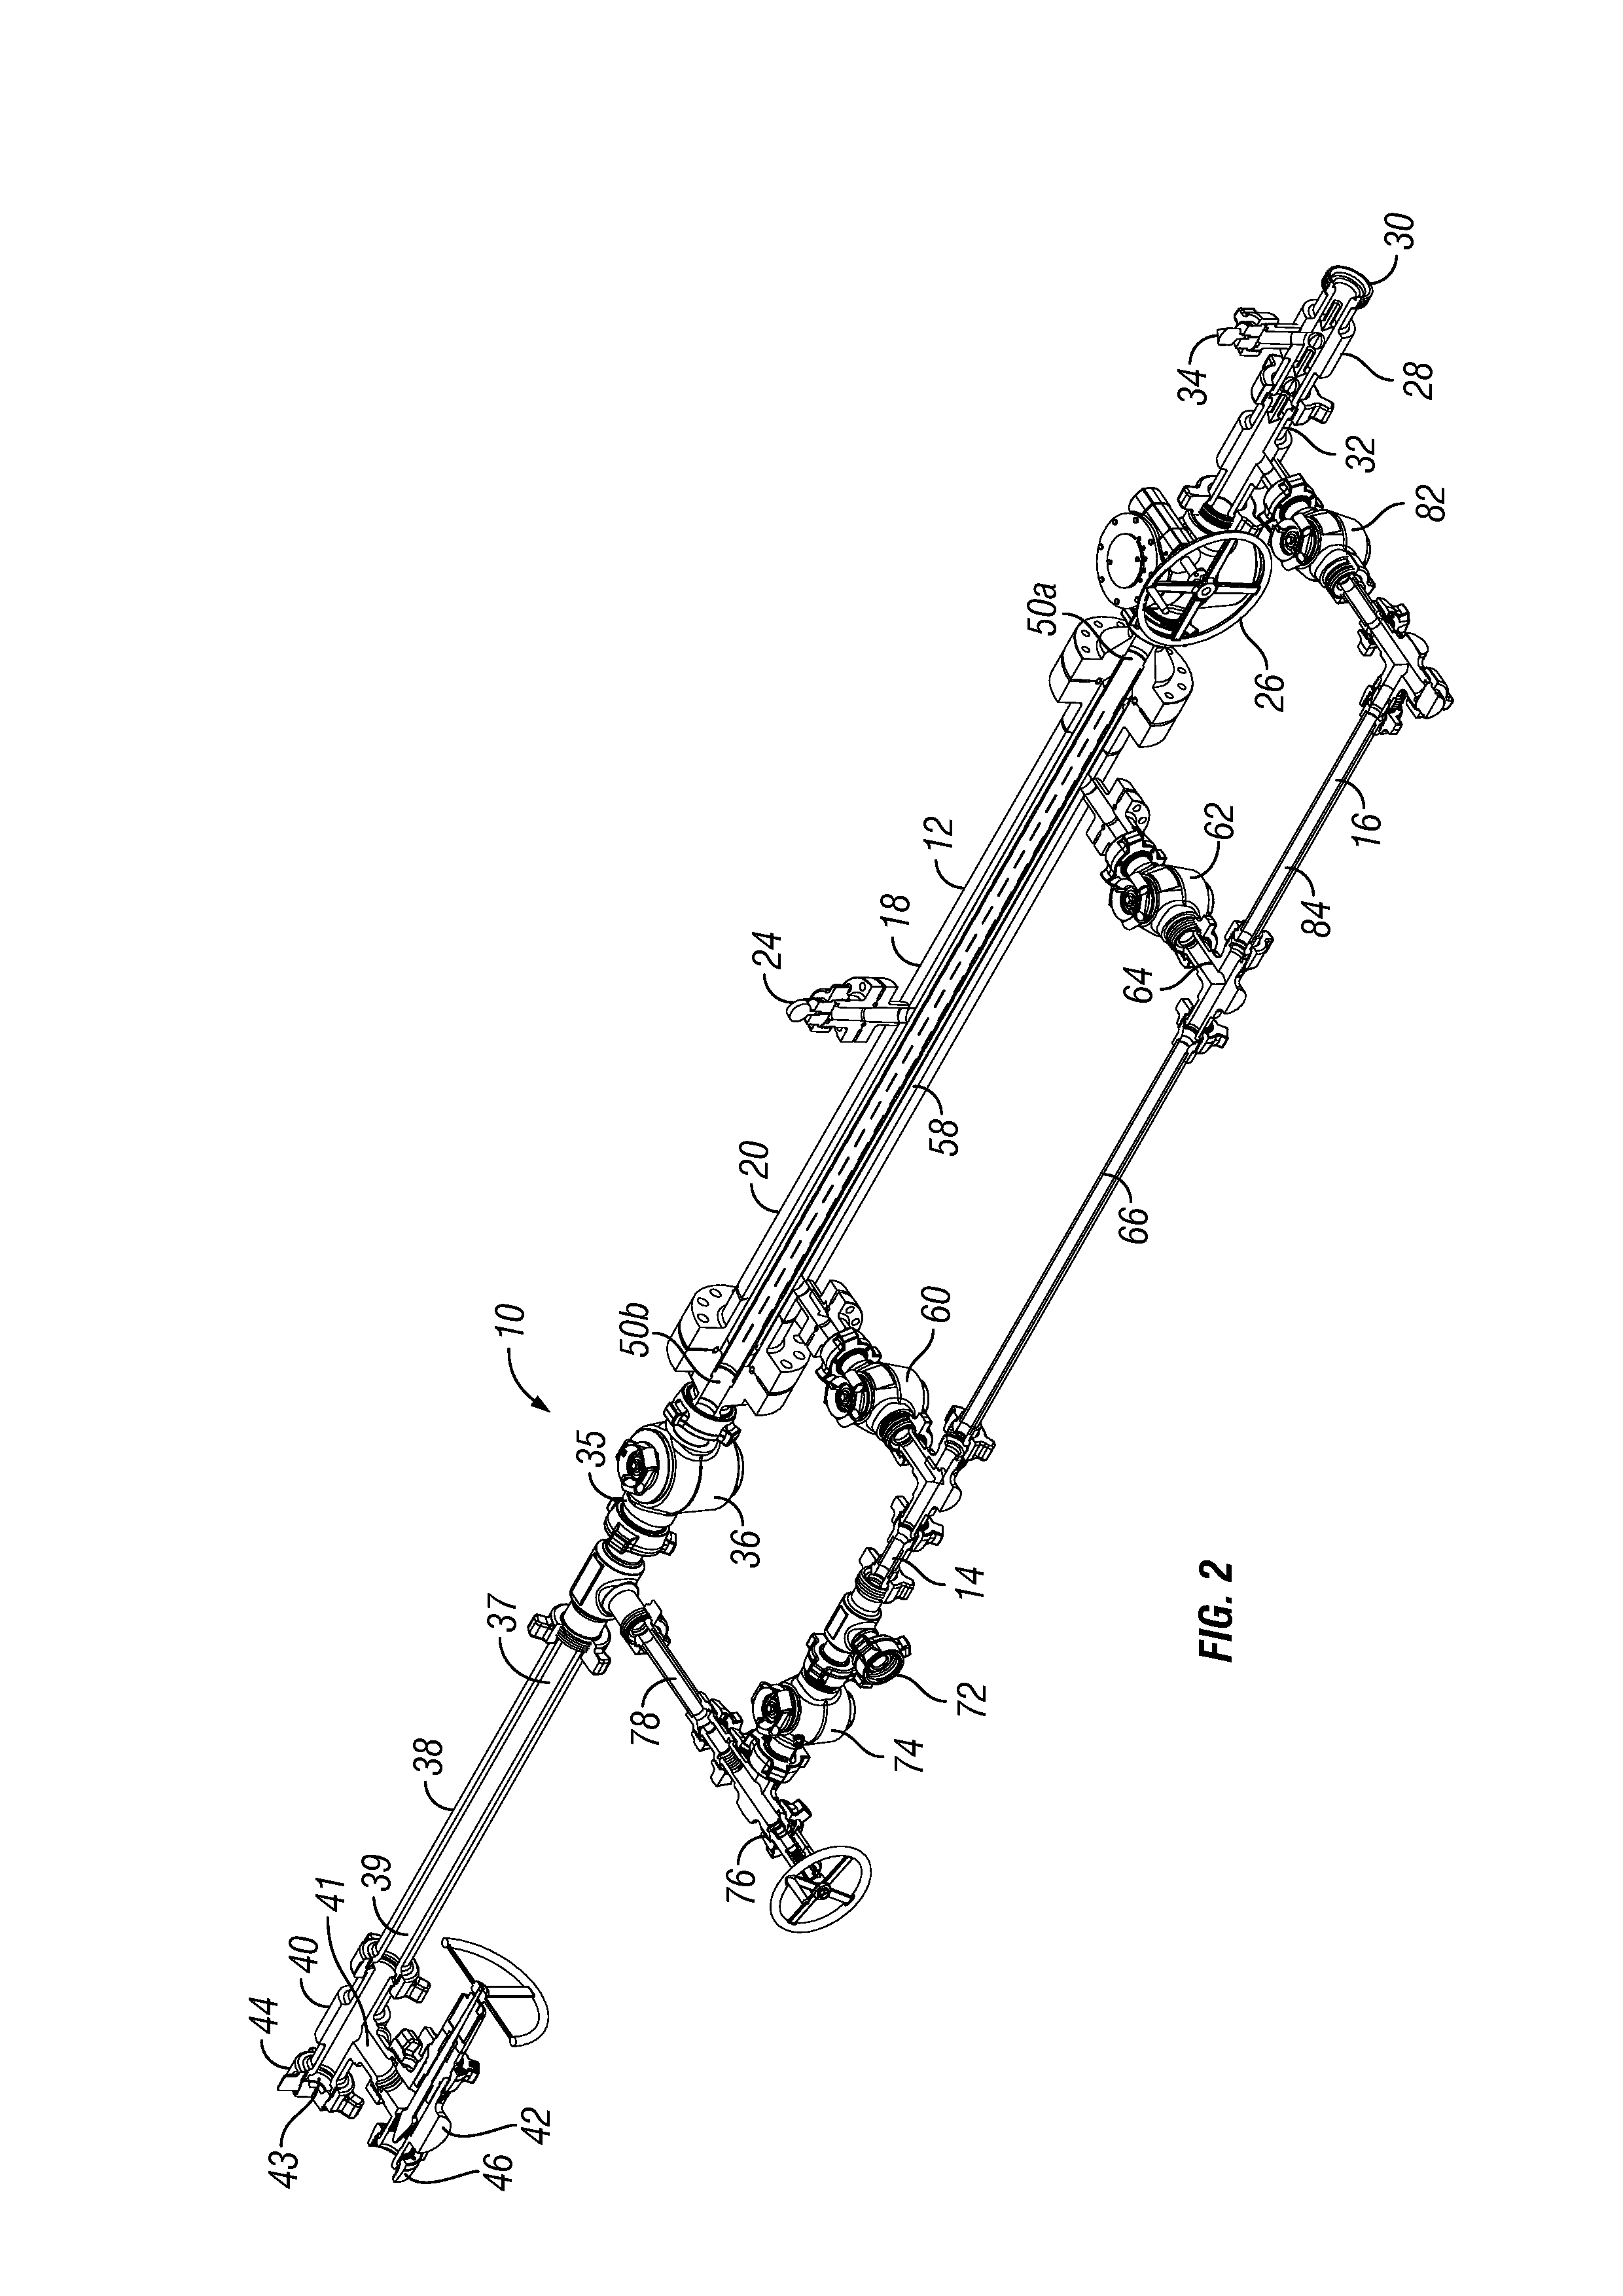 Method and system for surface filtering of solids from return fluids in well operations